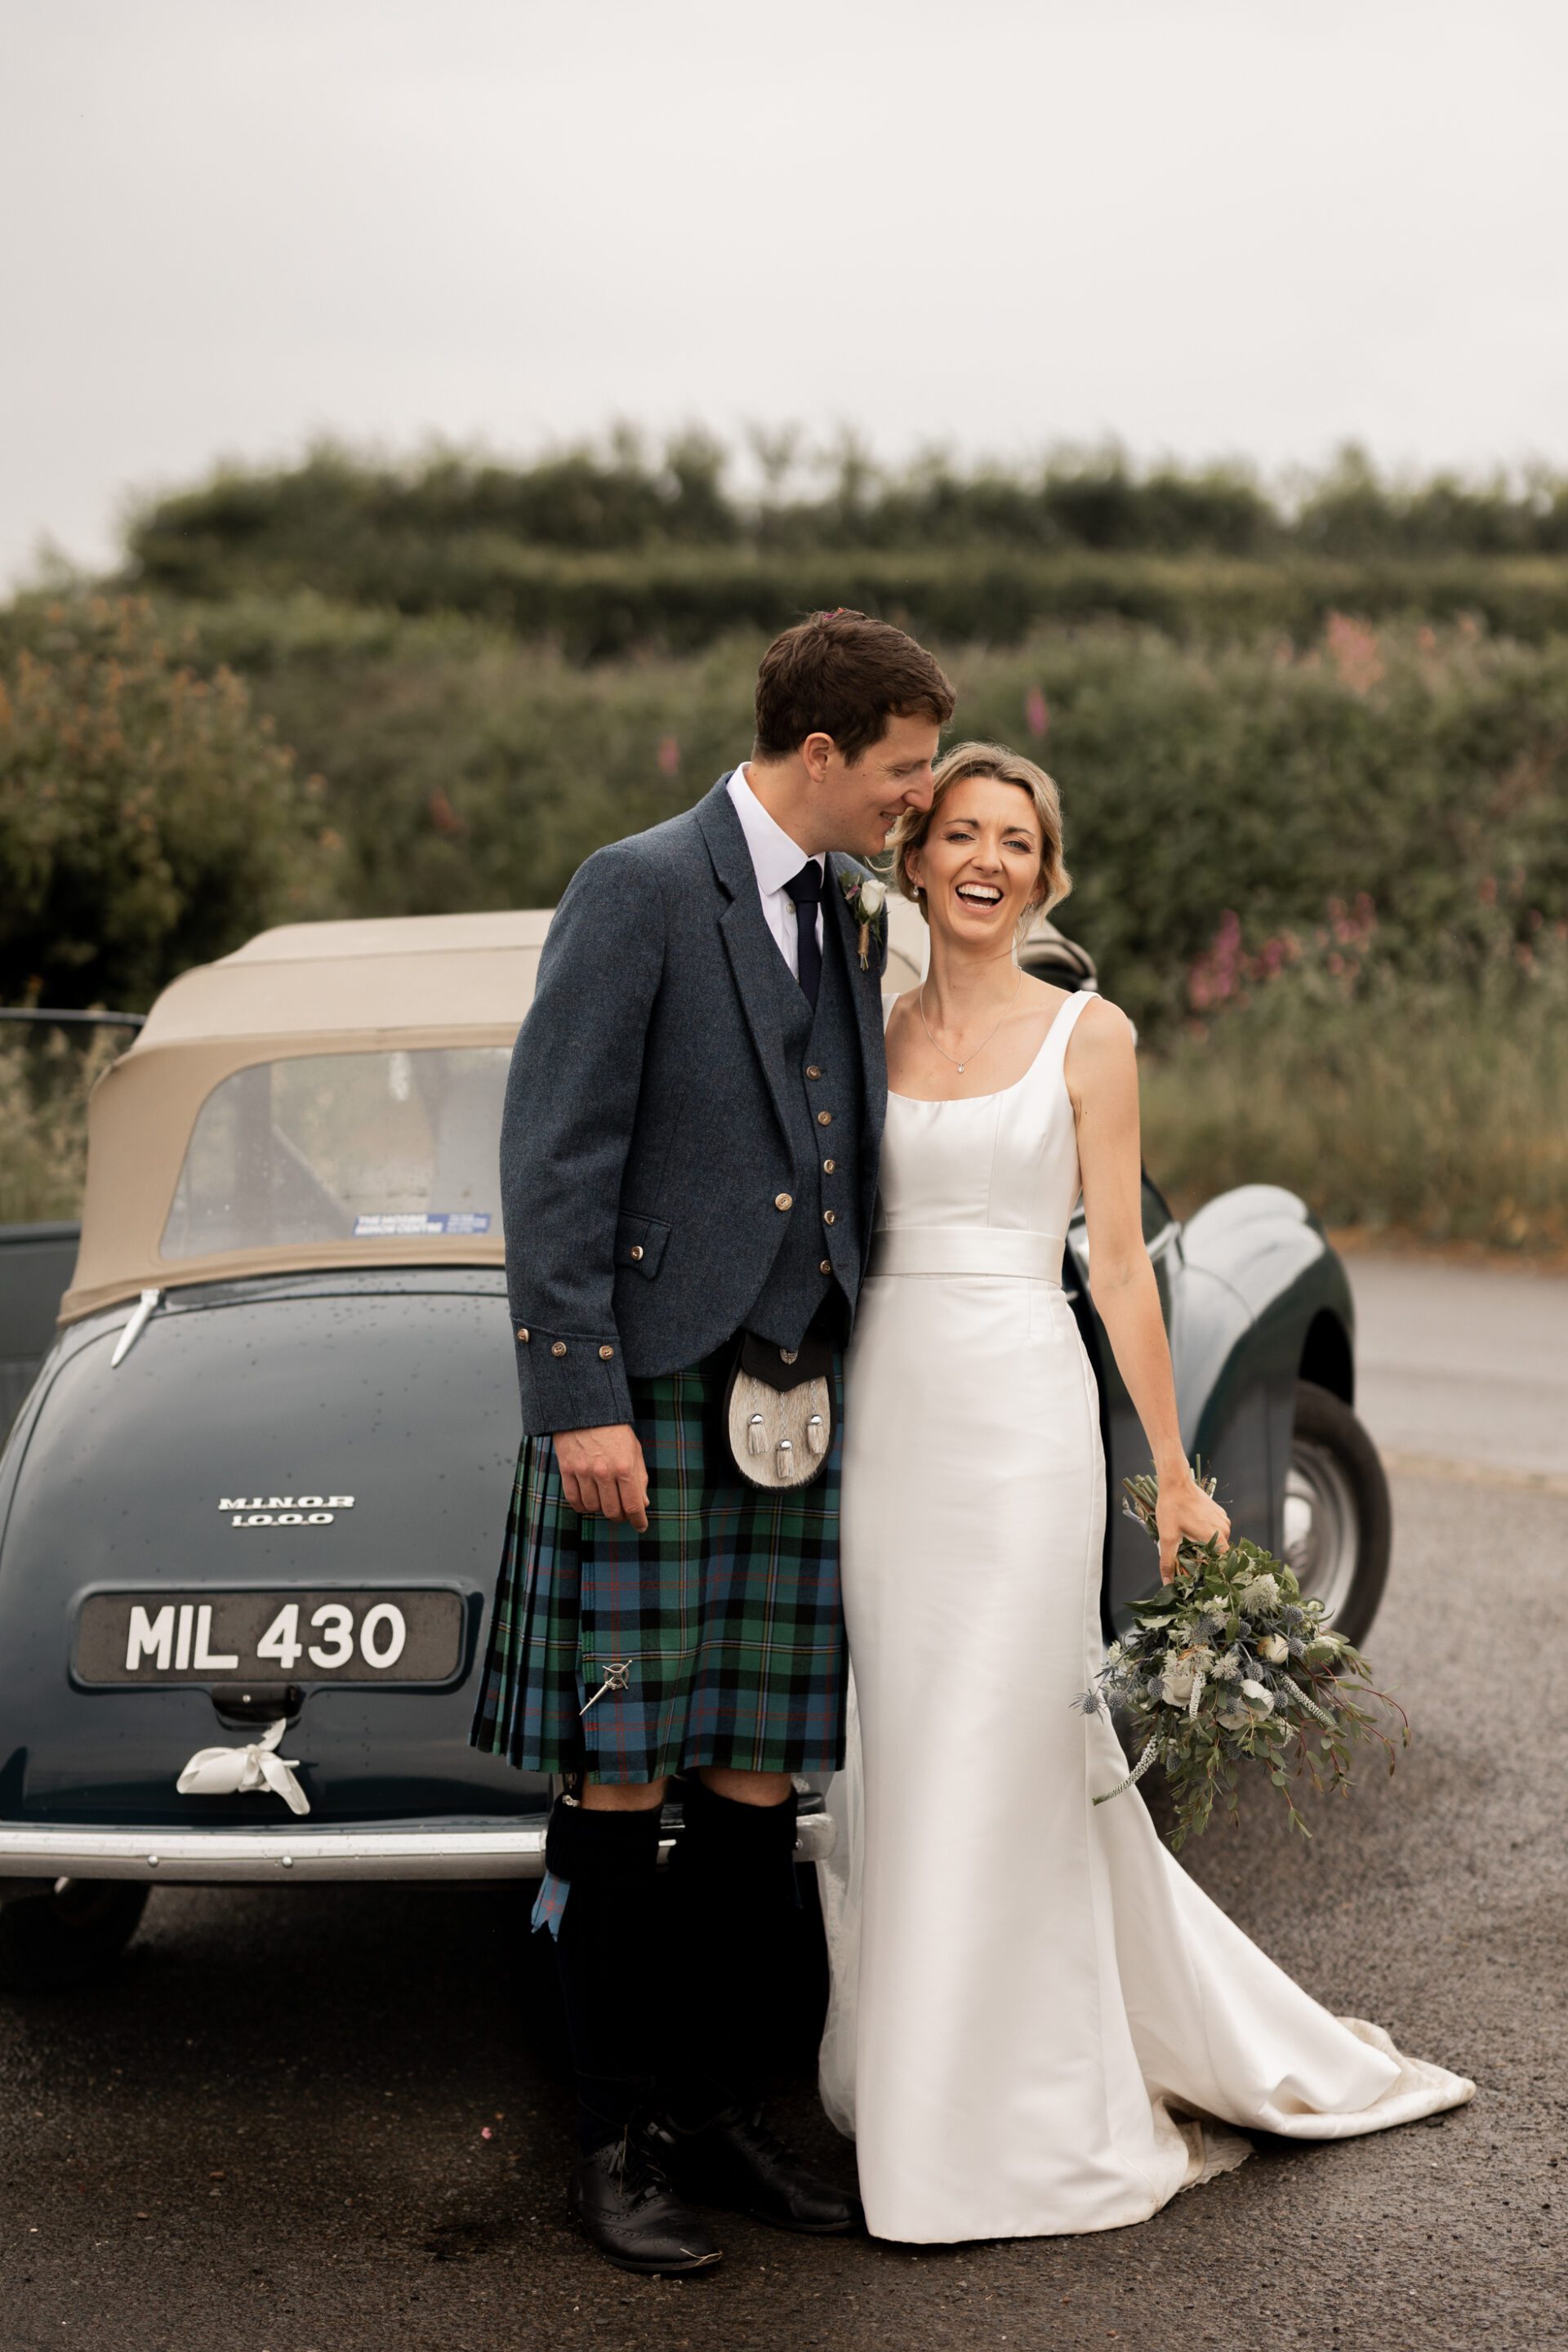 The bride and groom pose in front of their vintage wedding car in Devon